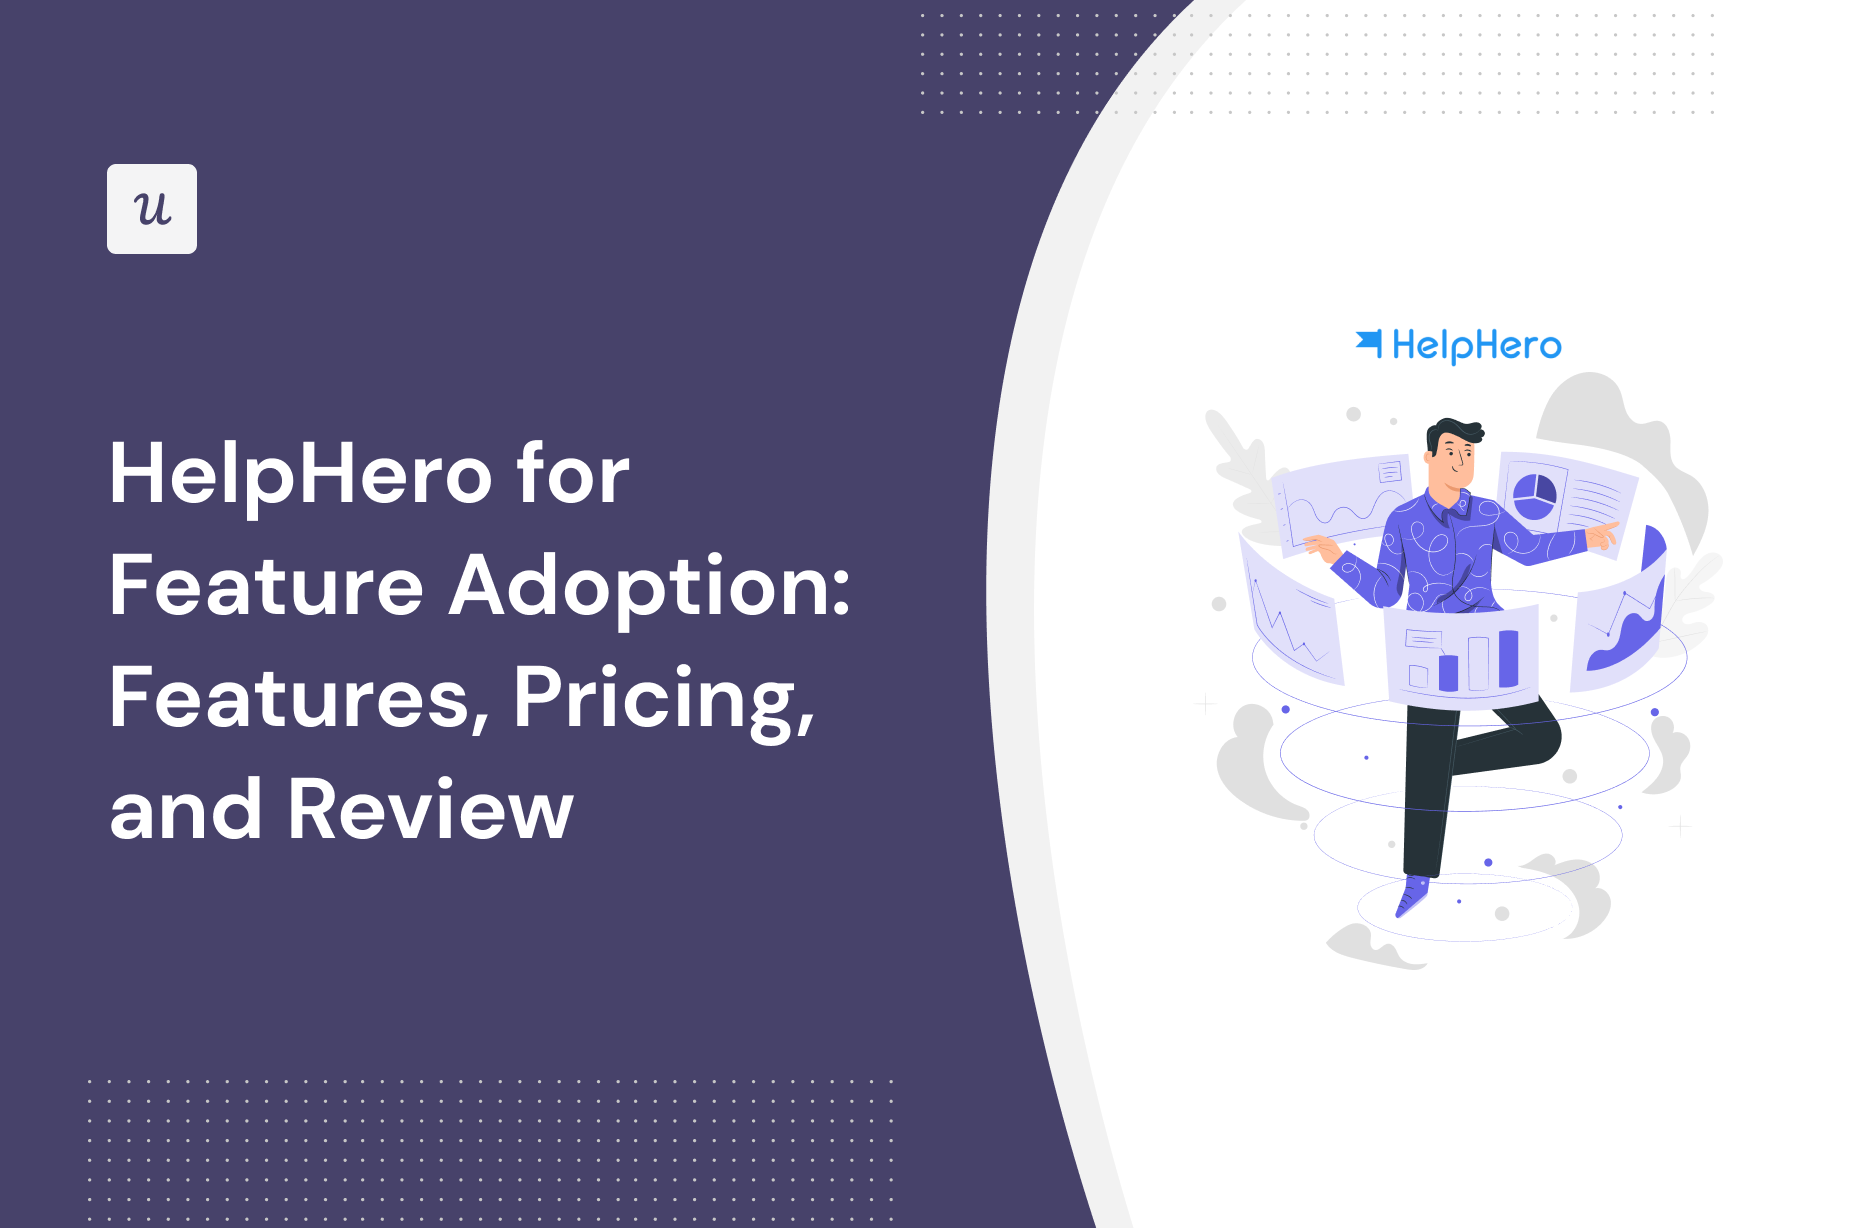 HelpHero for Feature Adoption: Features, Pricing, and Review